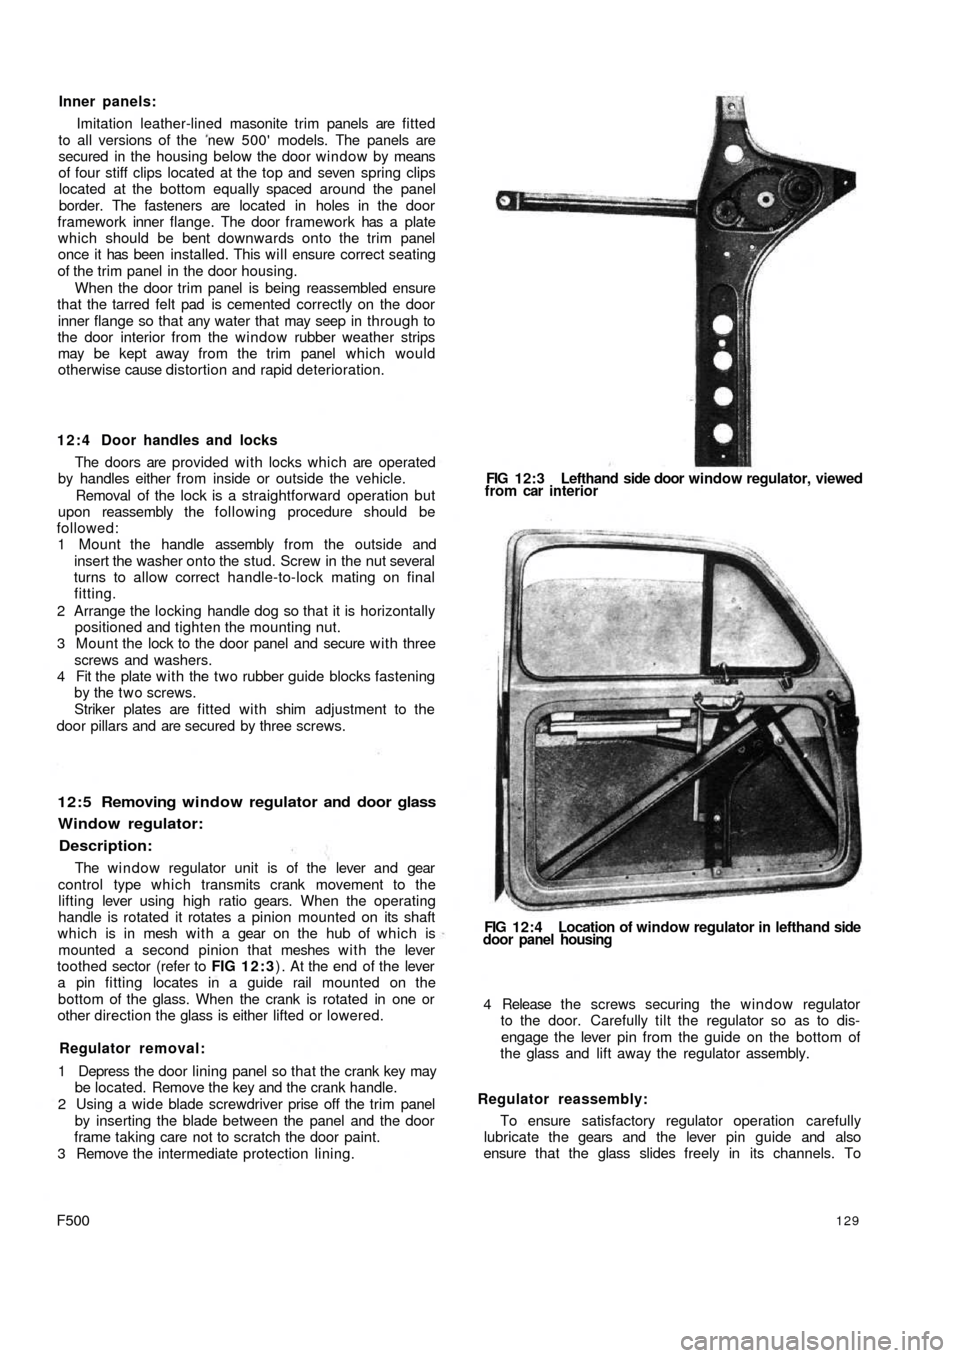 FIAT 500 1964 1.G Workshop Manual Inner panels:
Imitation leather-lined masonite trim panels are fitted
to all versions of the  new 500 models. The panels are
secured in the housing below the door window by means
of four stiff clips 